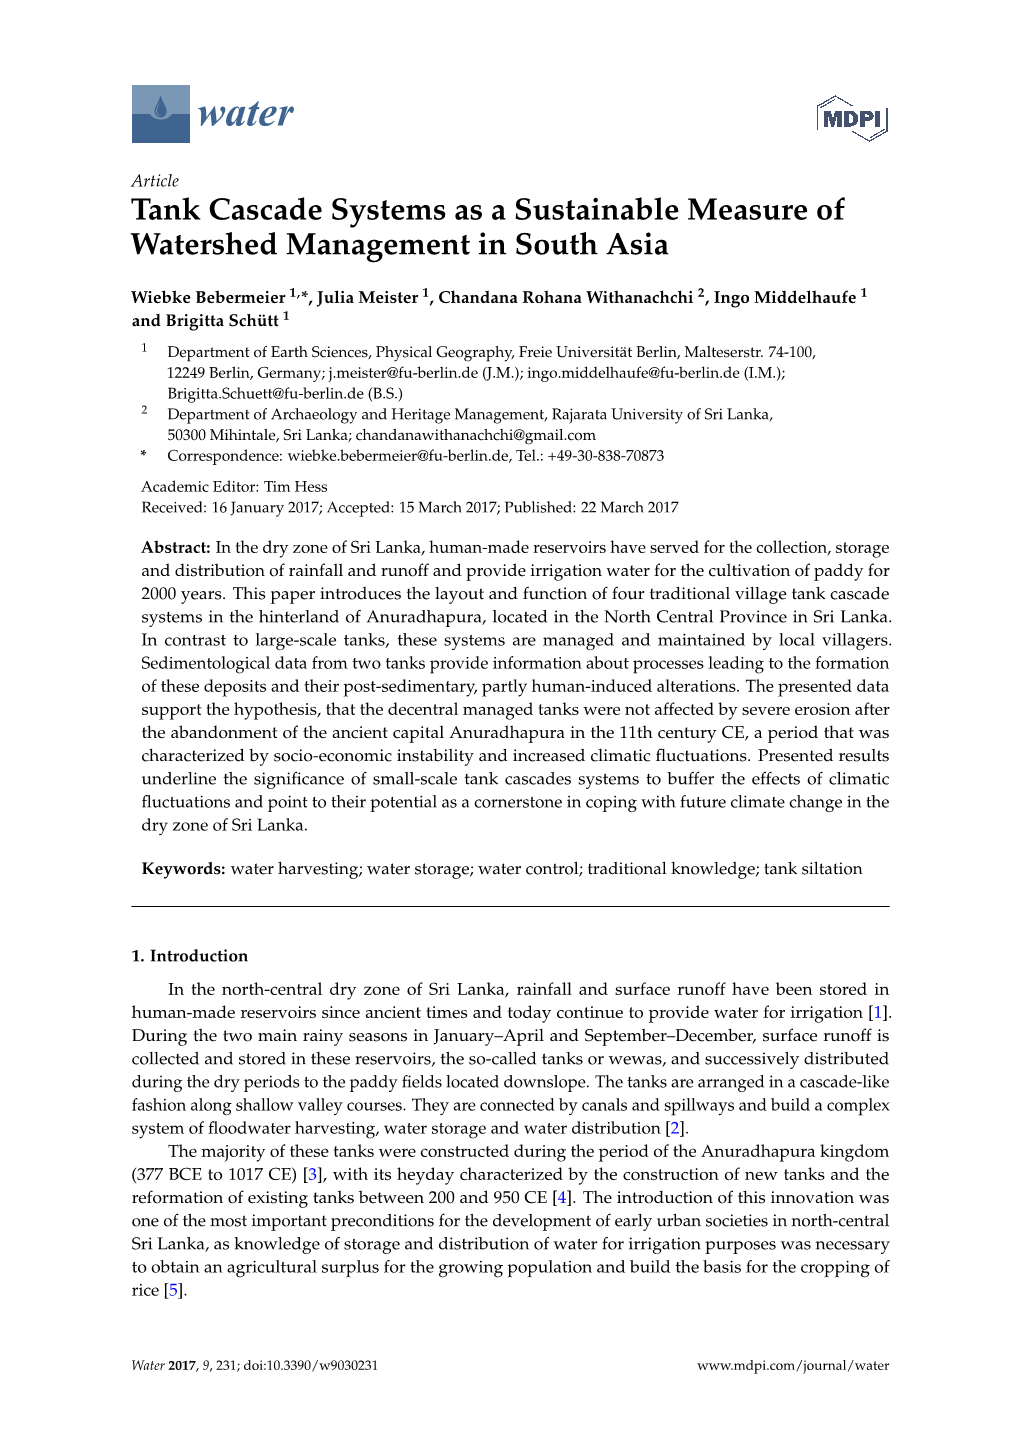 Tank Cascade Systems As a Sustainable Measure of Watershed Management in South Asia